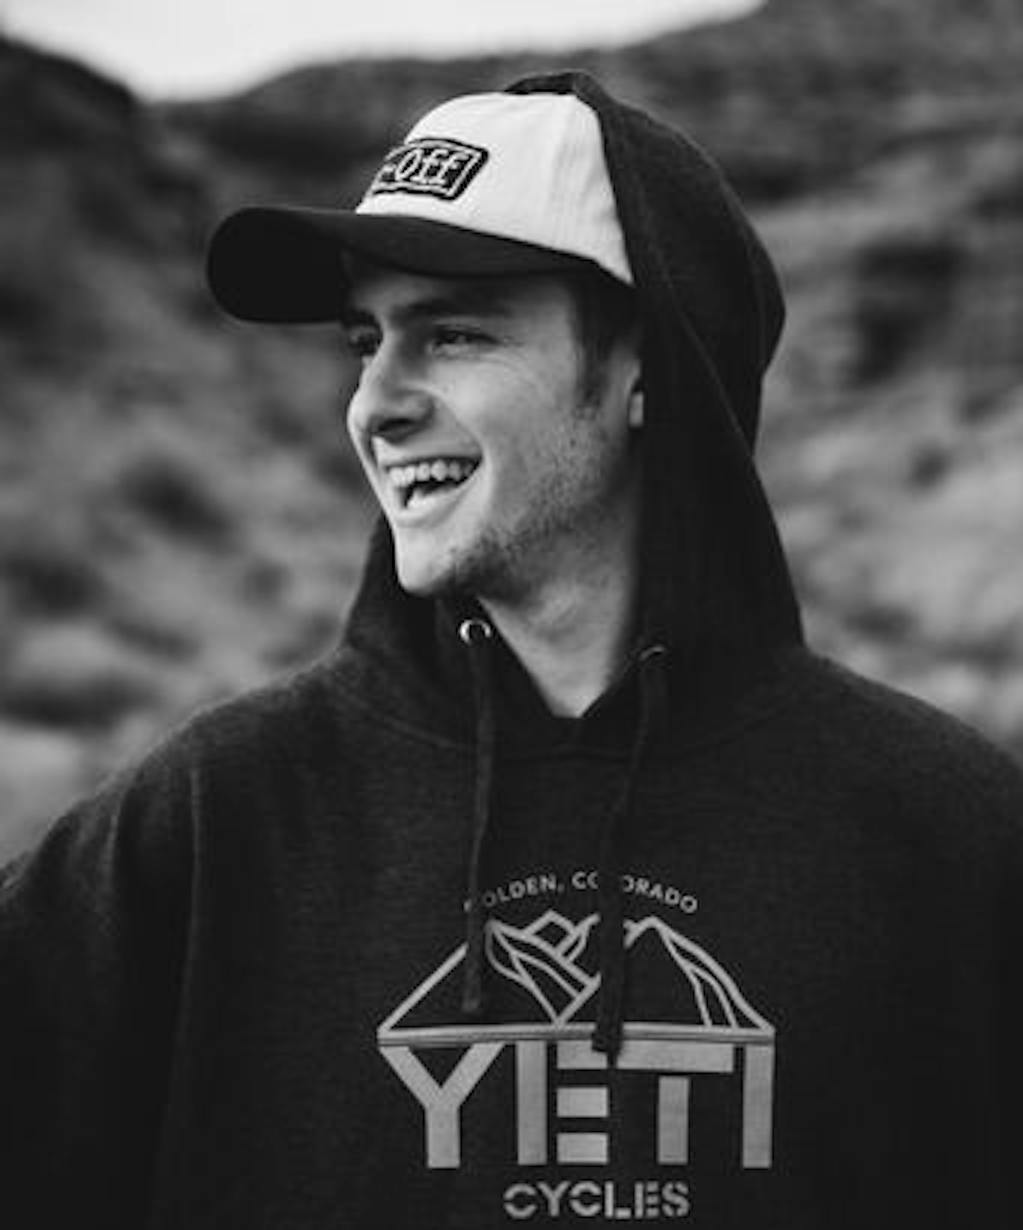 Reed Boggs welcome to Yeti